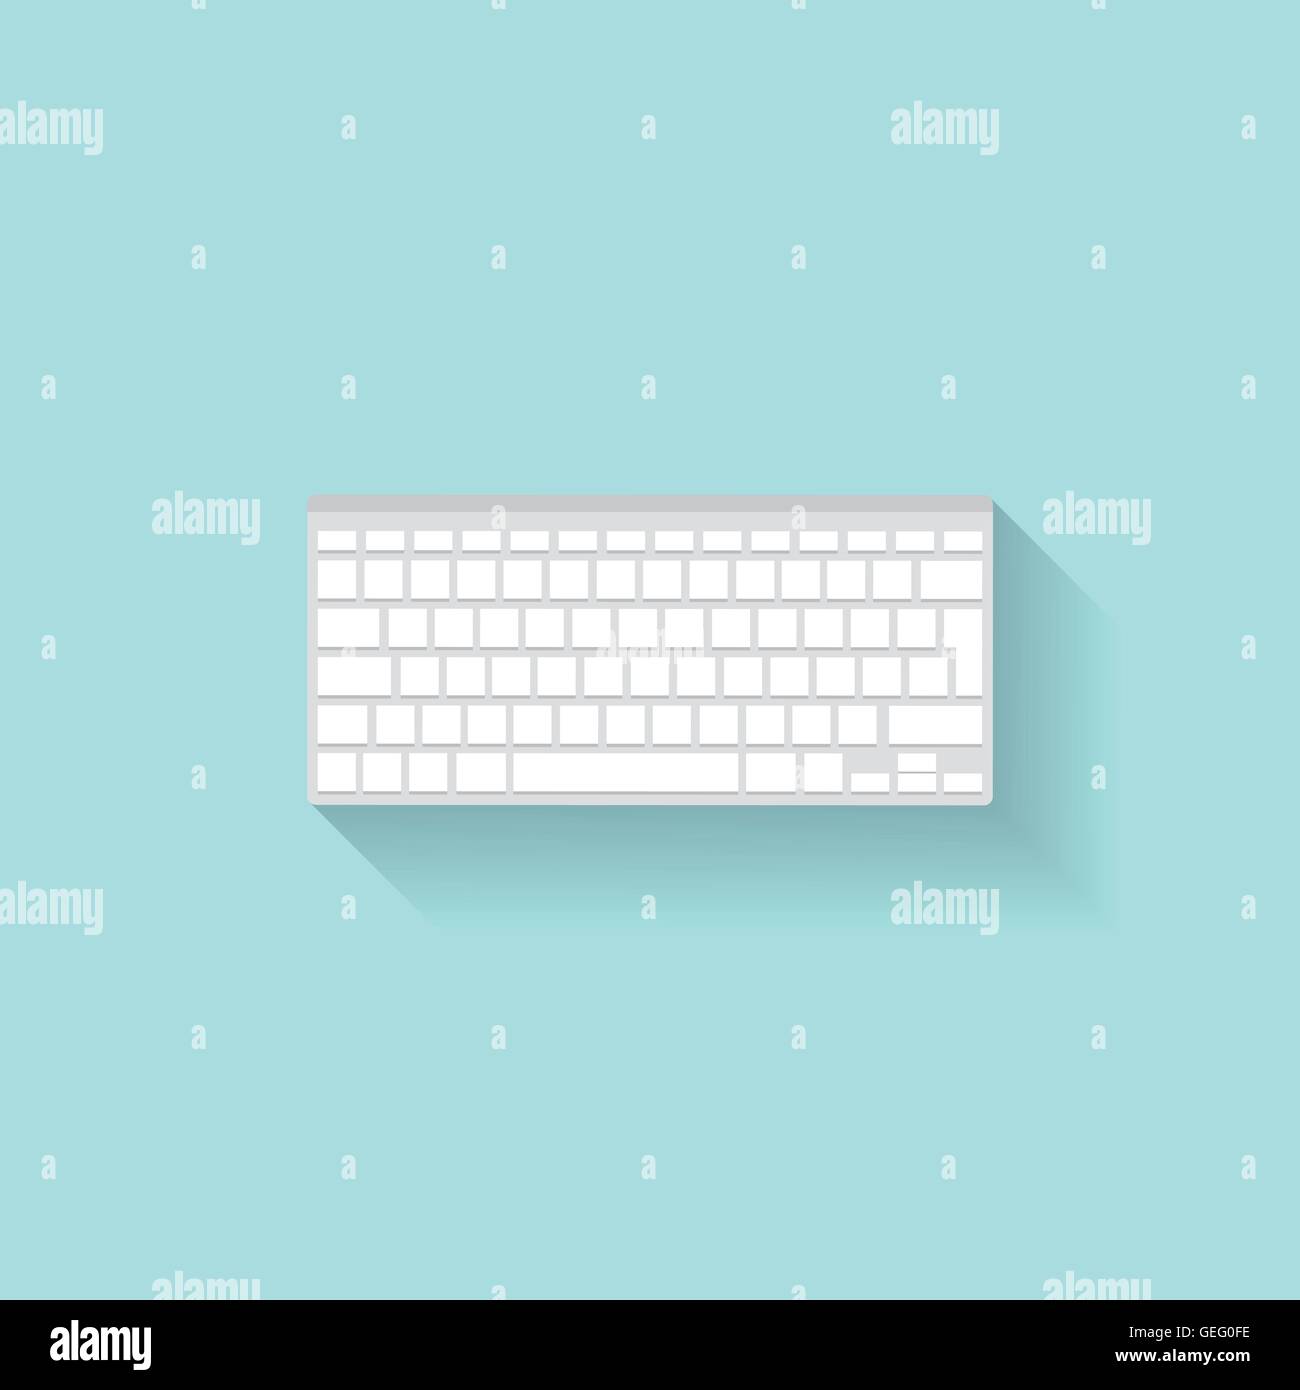 Computier keyboard in a flat style. Typing. Letters and numbers. Vector illustration. Stock Vector